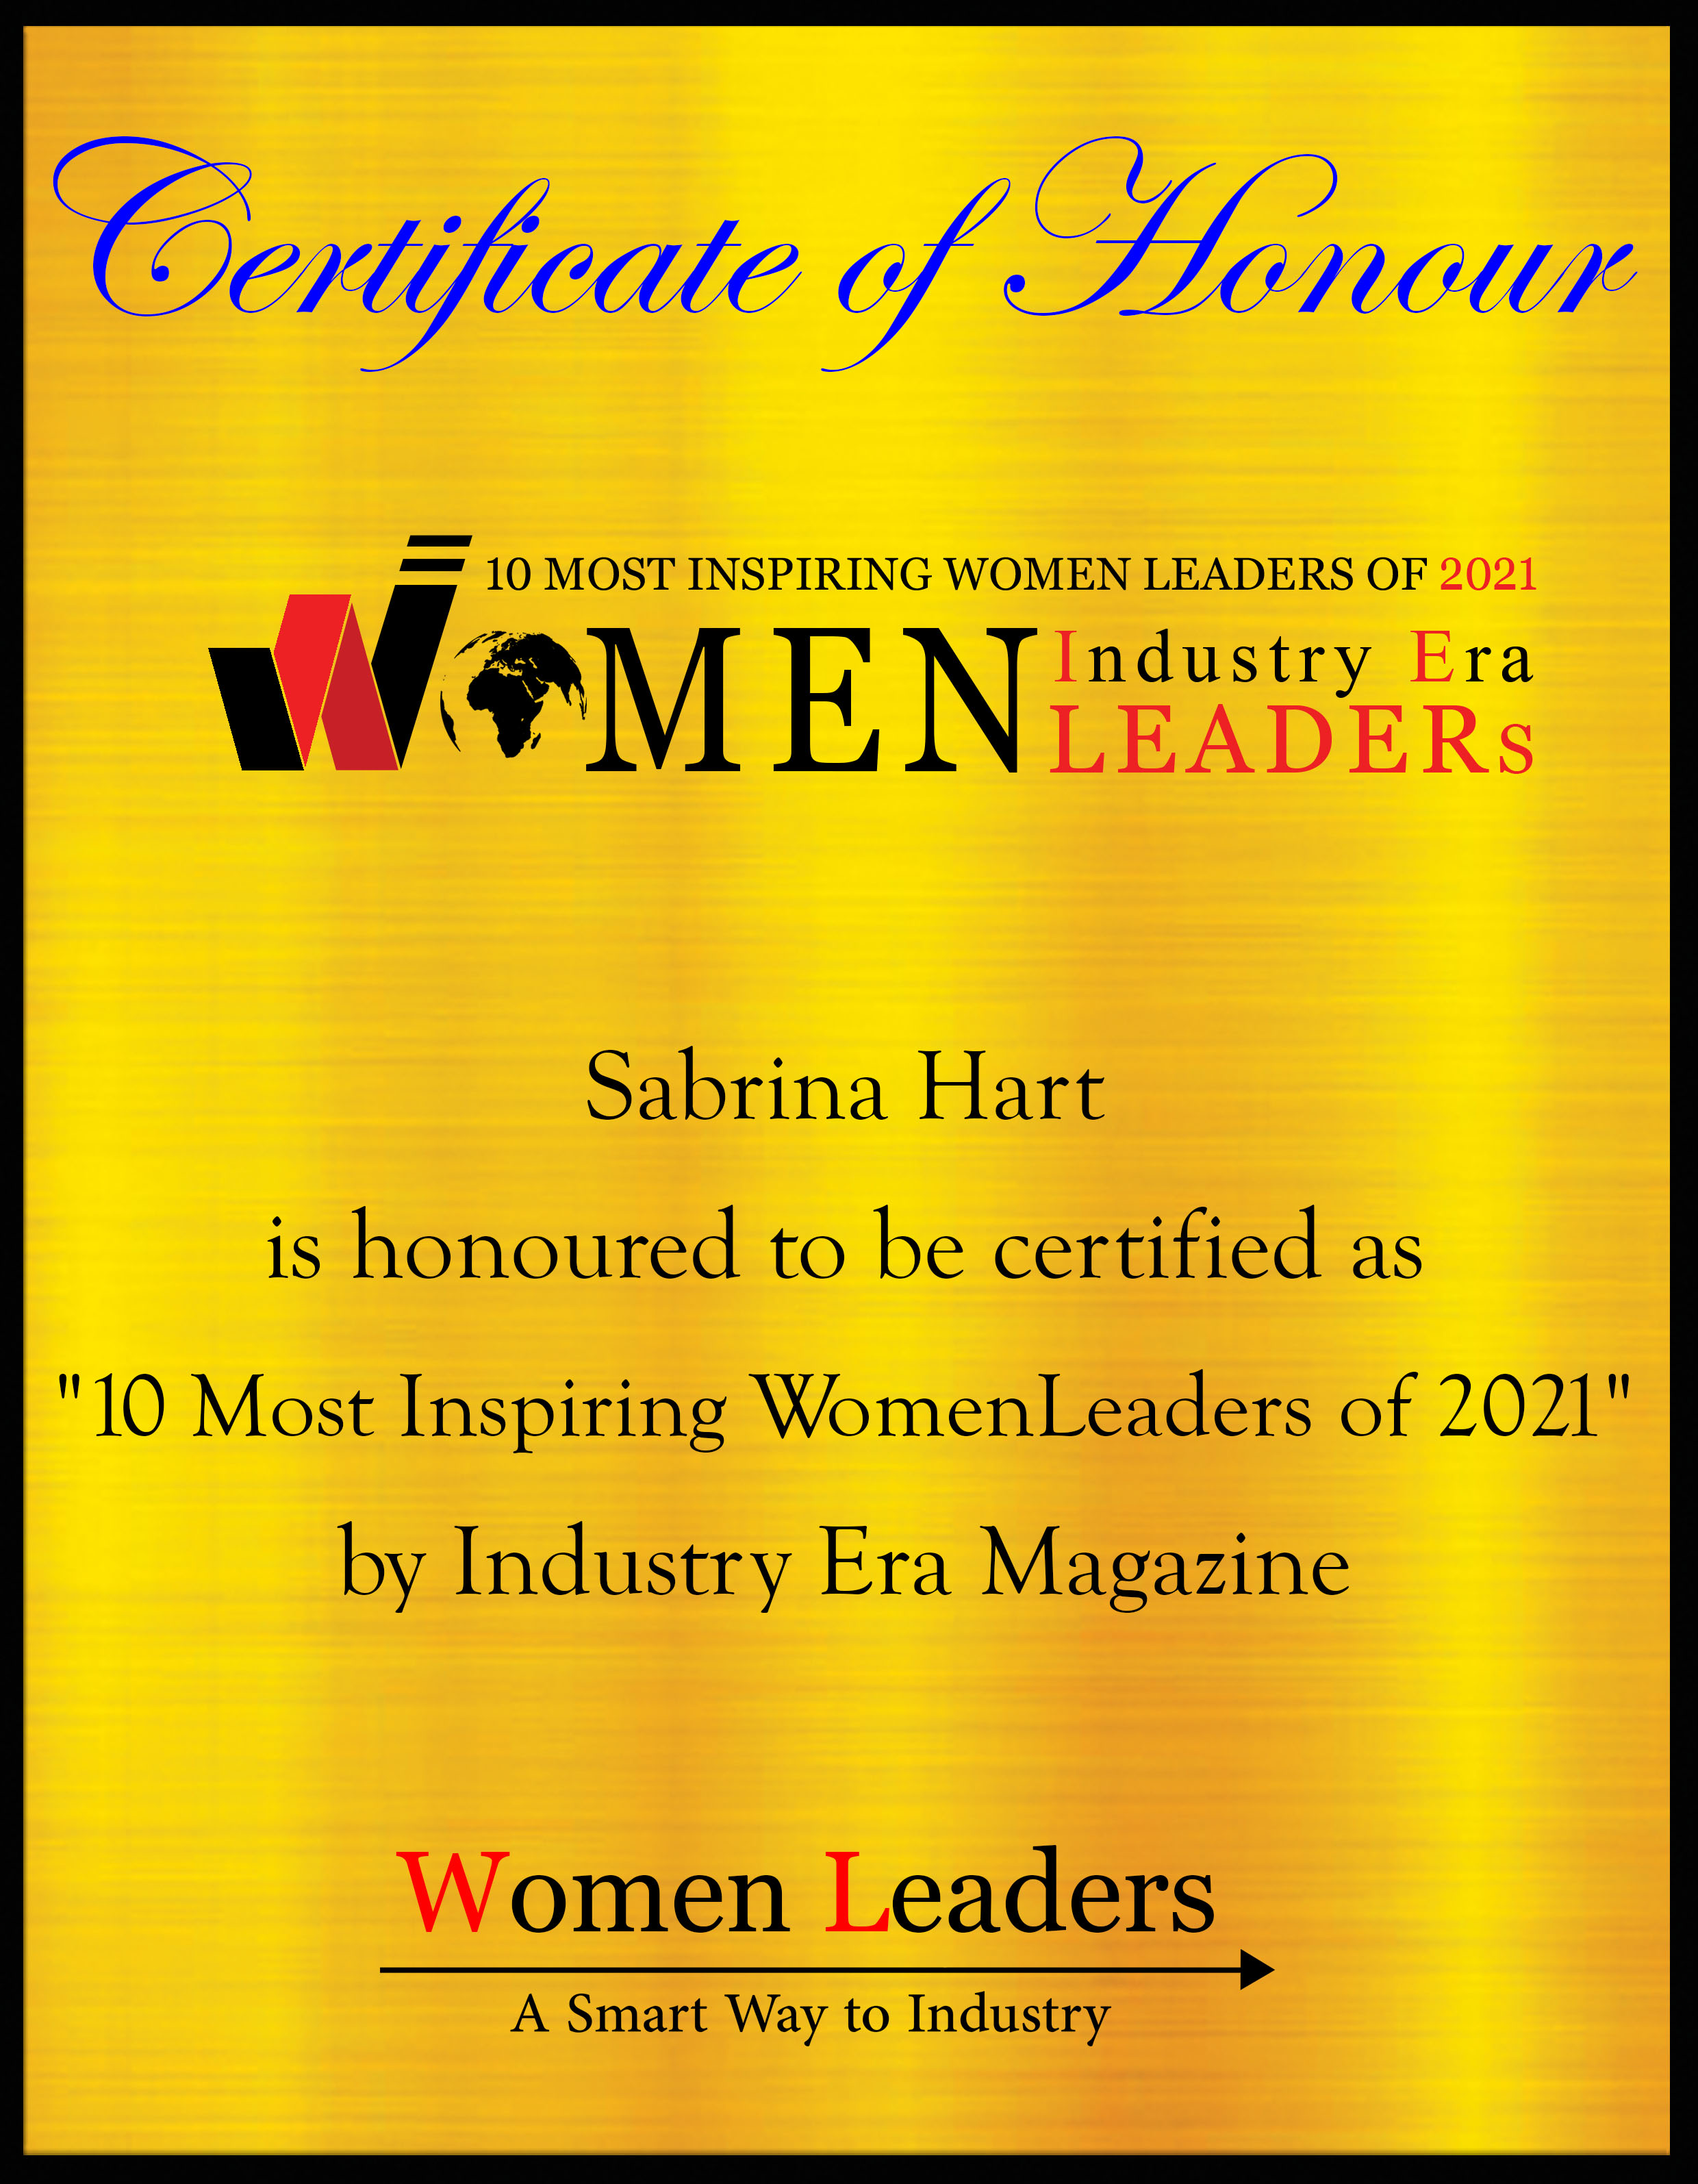 Sabrina Hart, Founder & CEO of S3 Marketing Solutions, Most Inspiring WomenLeaders of 2021